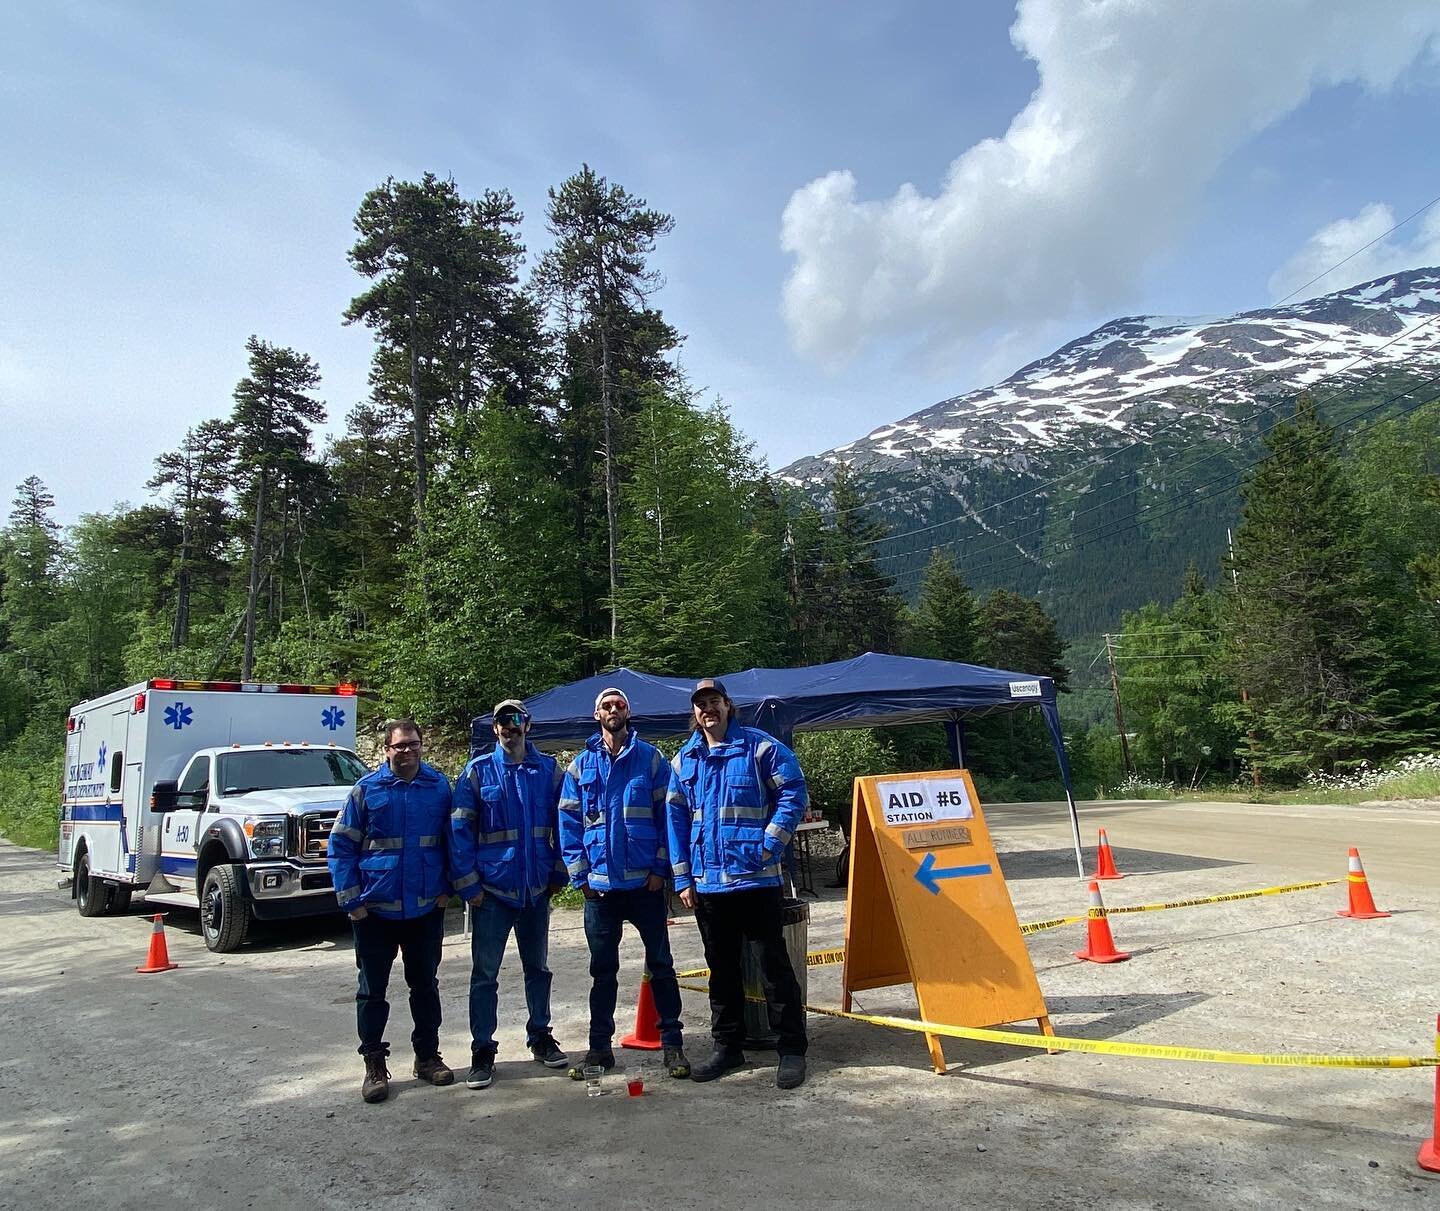 Skagway Fire Department was staffing Aid Station #6 at Nahku Bay Road during @duffsskagwaymarathon today handing out water, Gatorade, and cheers for the runners. This was also a good halfway point for any potential medical responses outside of town. 